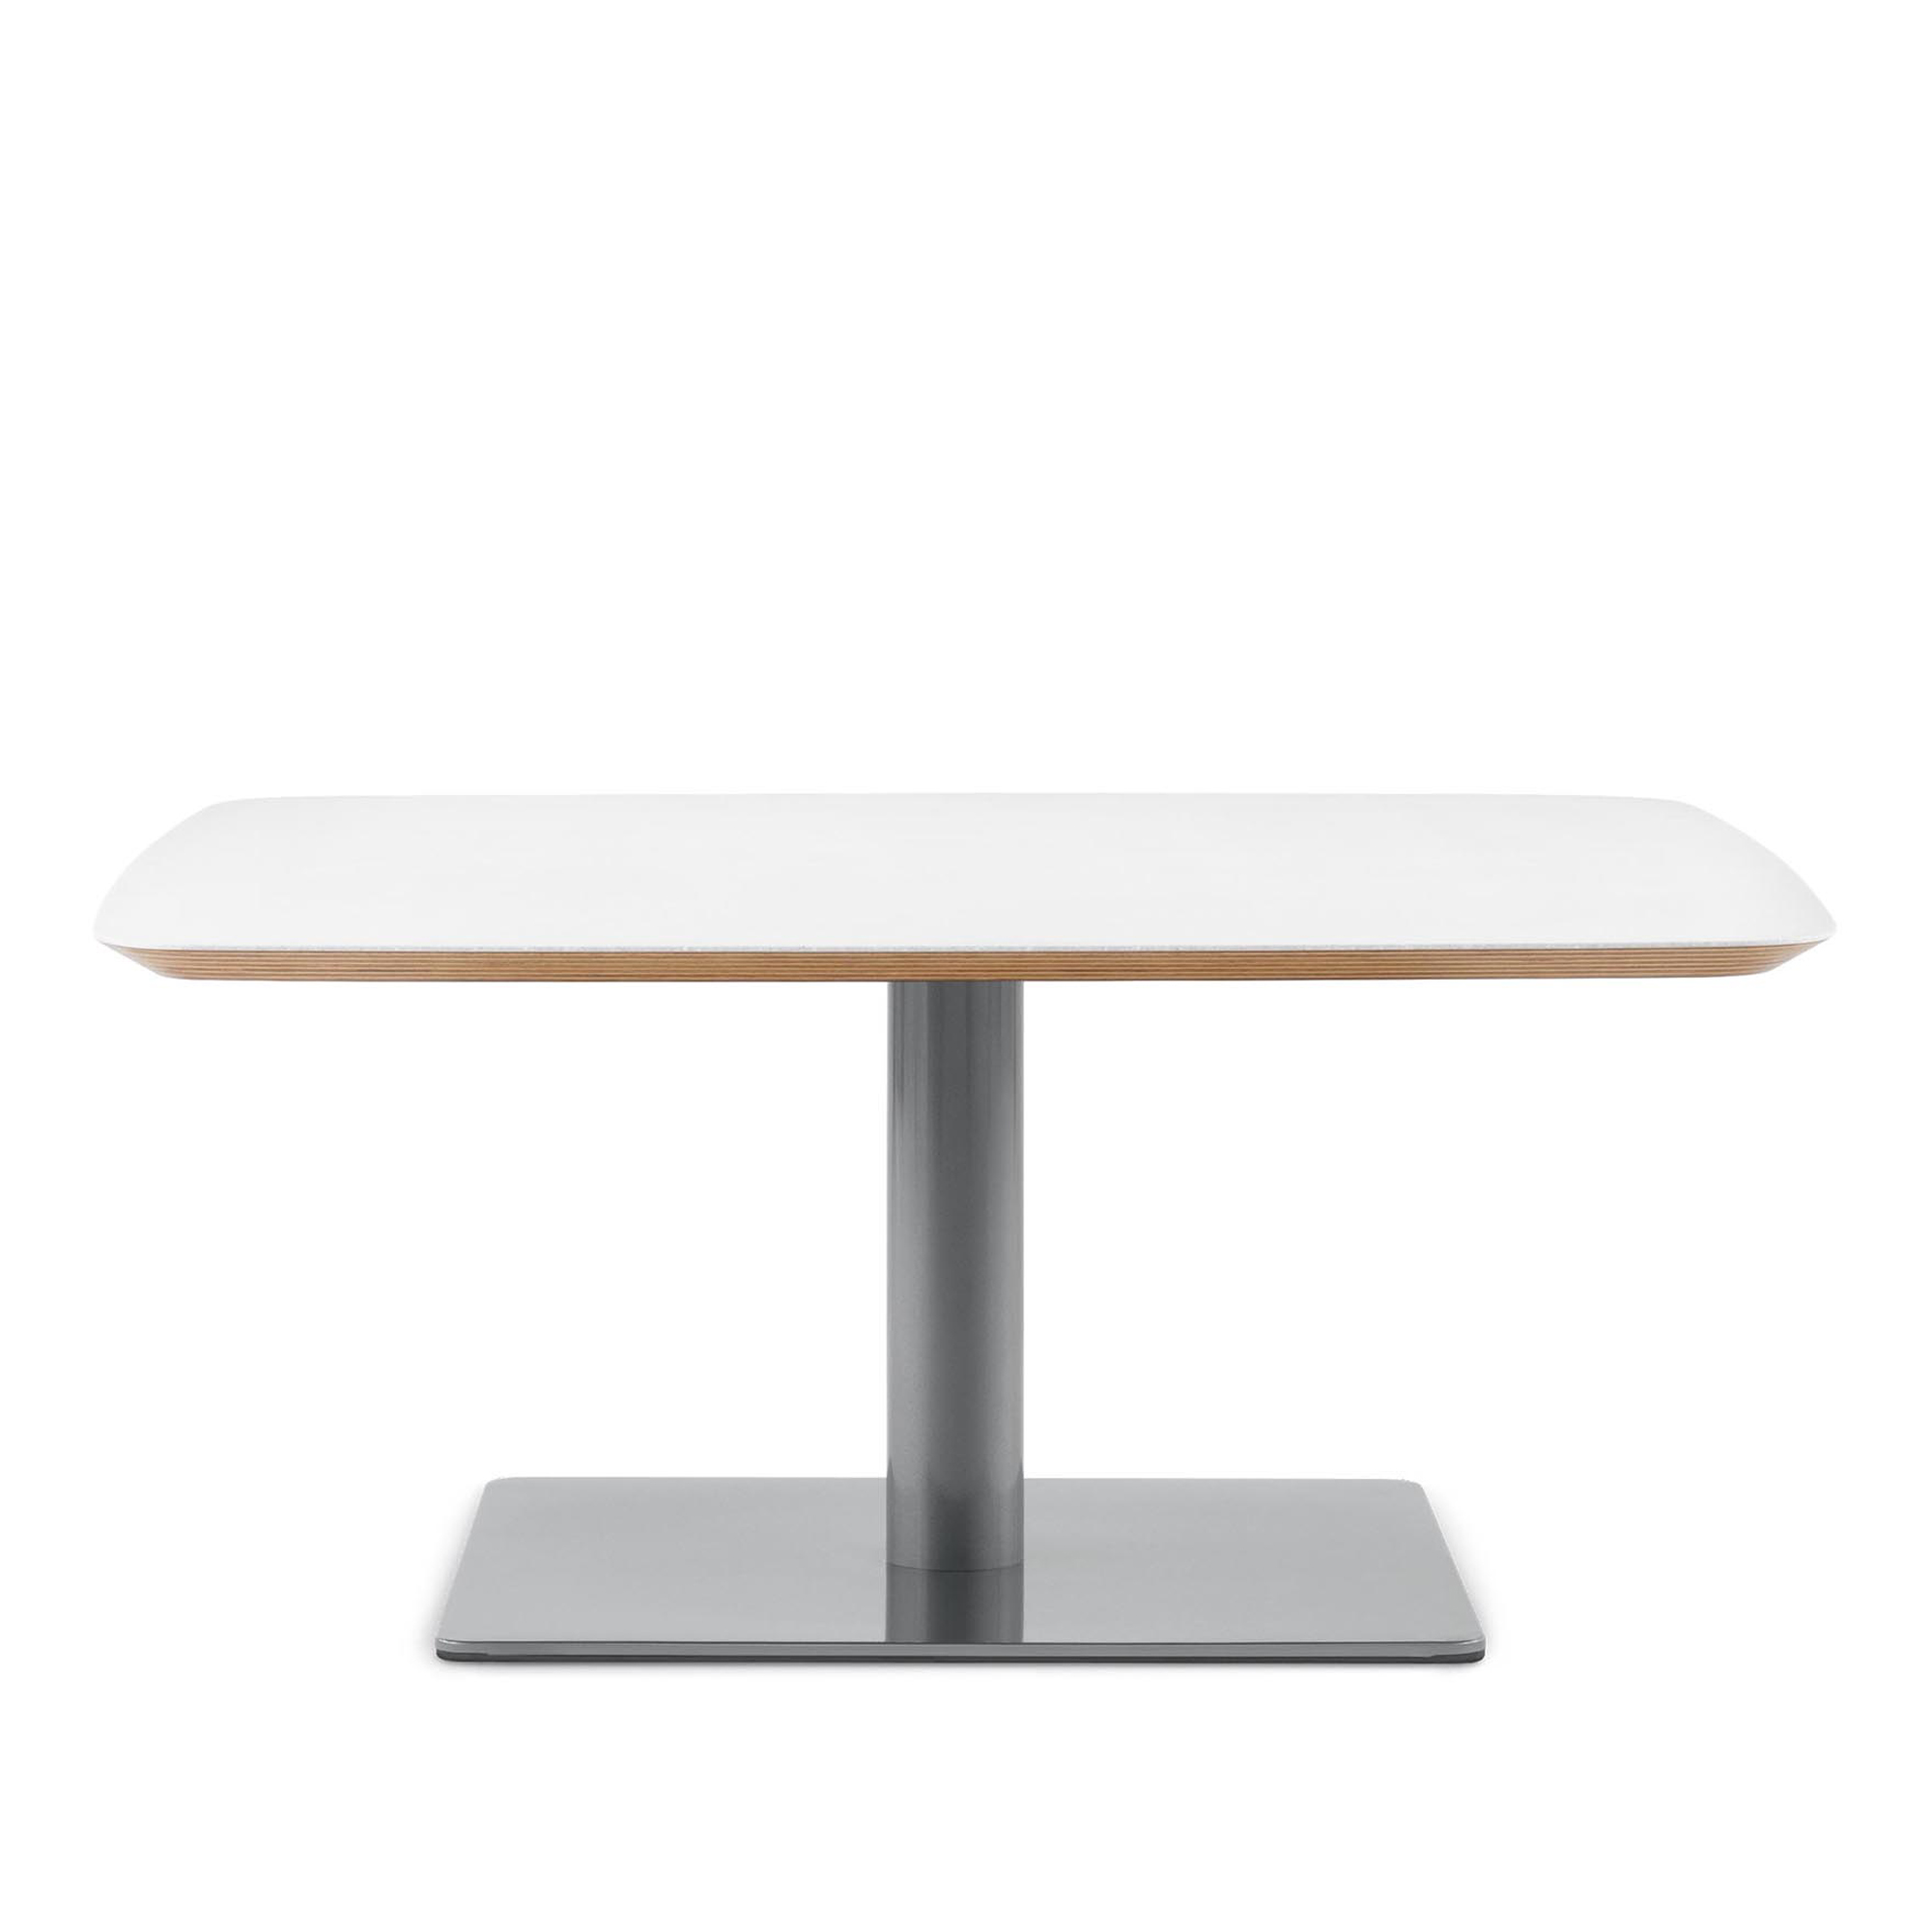 Skyline Occasional Table, Square Top